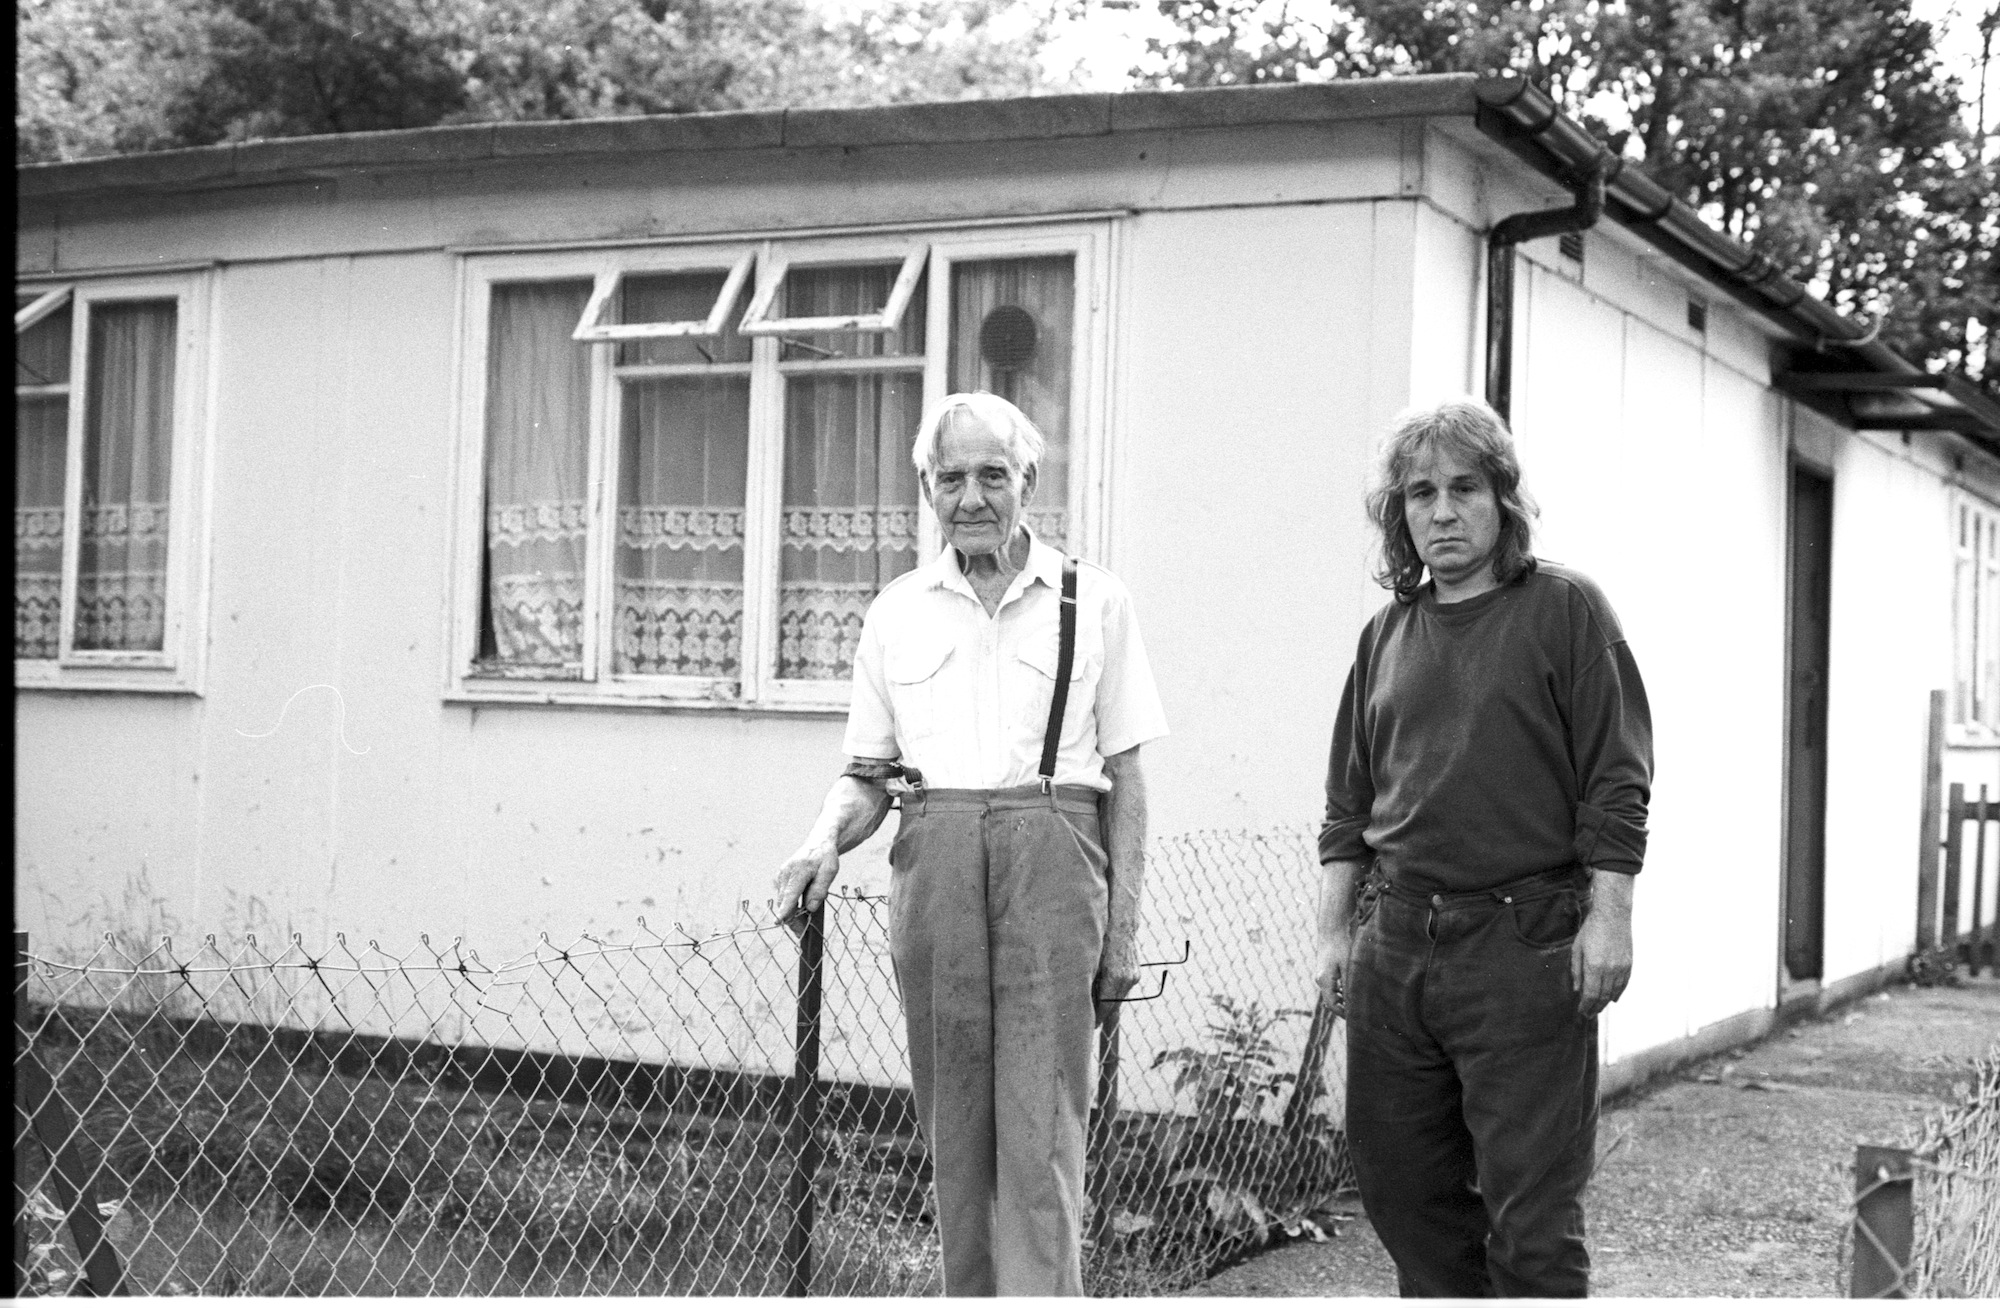 Peckham, South London, is where my prefabs journey starts. Well, my London one. I read an article about home parks in the Big Issue and wanted to go and photograph one. 'Why do people live in mobile homes, caravans, prefabs?' is a question I have always asked myself. I was talking to a colleague at the French school where I used to work about this idea of doing a piece about a park home outside London. 'You don't need to go that far' she says, 'there are some sorts of mobile homes where I live down in Peckham. Come round and I'll show you'. Which I did... I found myself in front of a row of prefabs. What were they still doing here? Still standing and very much lived-in? I knocked on a door. An old man opened and asked me what the purpose of my visit was. I said I was a French photographer interested in his little house. Could he tell me more about it? He invited me in for a cup of tea and started to tell me what he knew about the history of Britain post-war prefabs. He became particularly talkative when he found out I was from Normandy, where he had landed in June 1944. He proudly showed me his prefab. Although he didn't wish to be photographed, the time I spent with him was a wonderful introduction to the world of post-war prefabs. Stanley and Ted, father and son outside their prefab on Kimberley Avenue. I haven't got any picture of their interior for a good reason: they freaked me out... When I knocked on their door back in 2002, Ted invited me in, showed me his living-room and shut the door behind me. I panicked for a few seconds. I was in the filthiest place I had ever seen. The floor and the furniture were all covered with newspaper, there was dog poo about everywhere and behind the kitchen door, I could here the dog barking. I felt trapped. How to escape? Lucky me, Ted didn't want me any harm. I can't remember exactly what happened but I must have found an excuse and he let me go. It was one of the only times I said no to a cup of tea in a prefab.